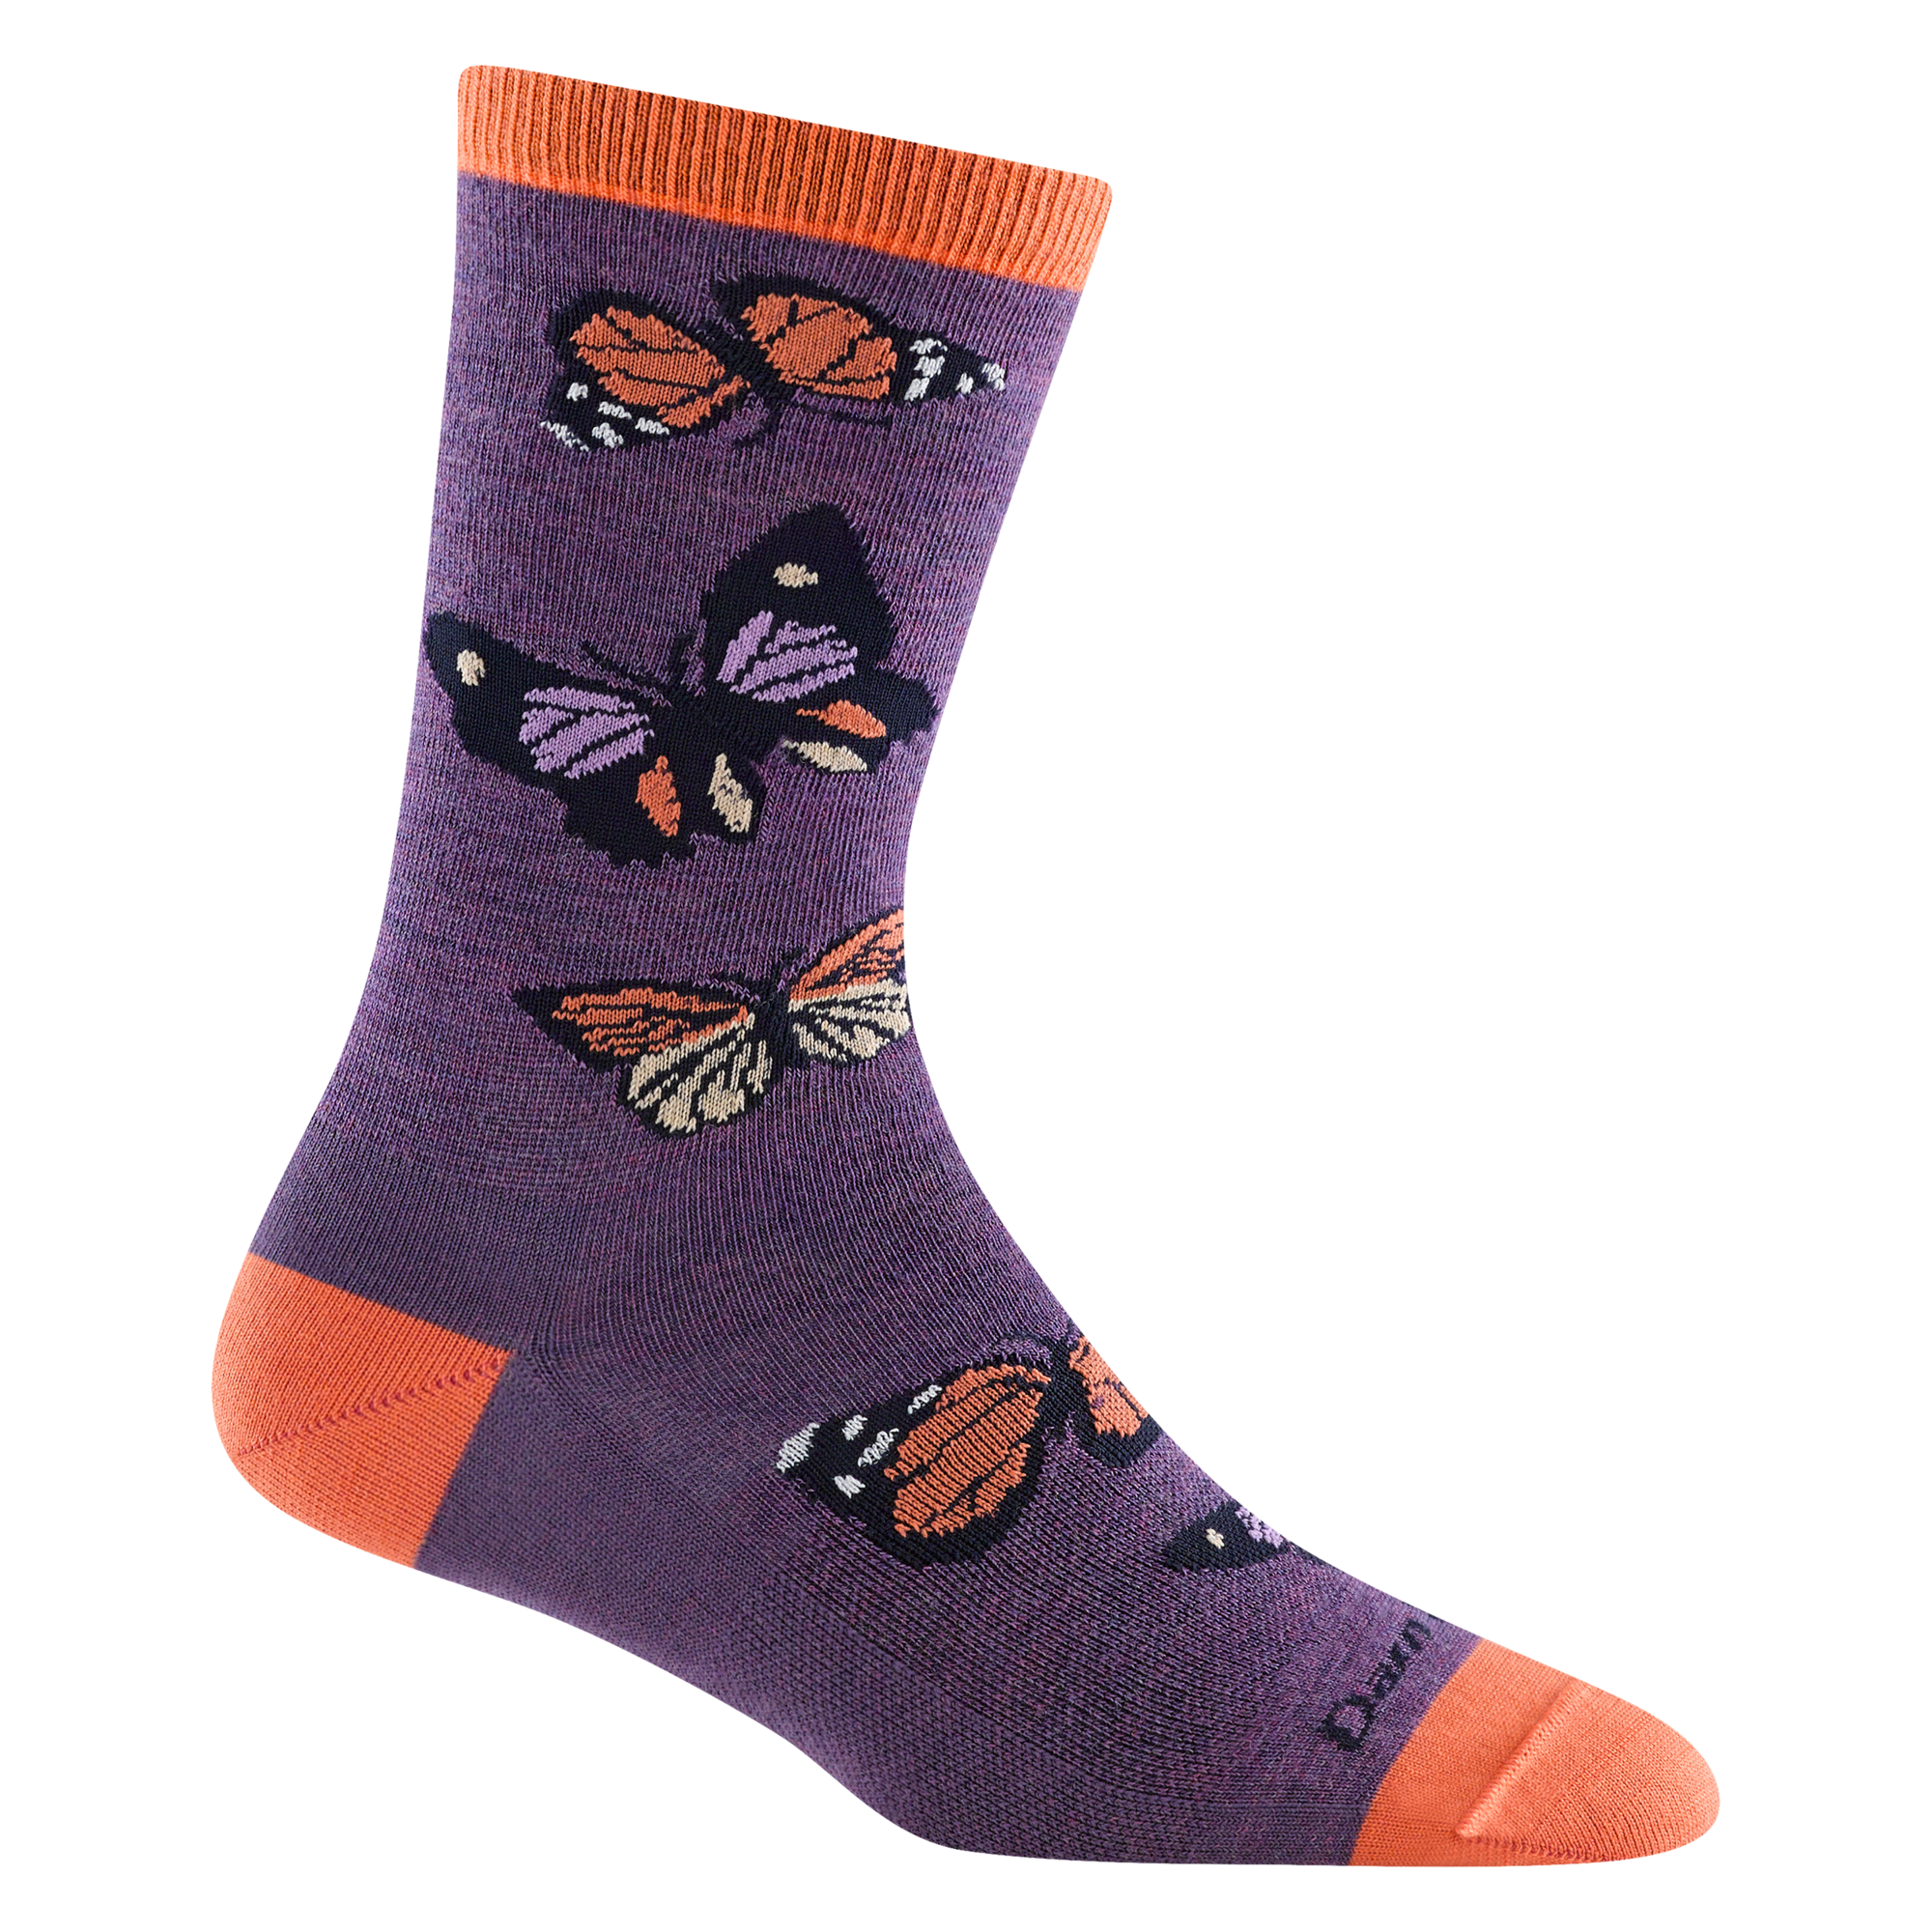 6109 Flutter in plum featuring orange heel/toe/cuff with purple body and orange and tan butterfly design 